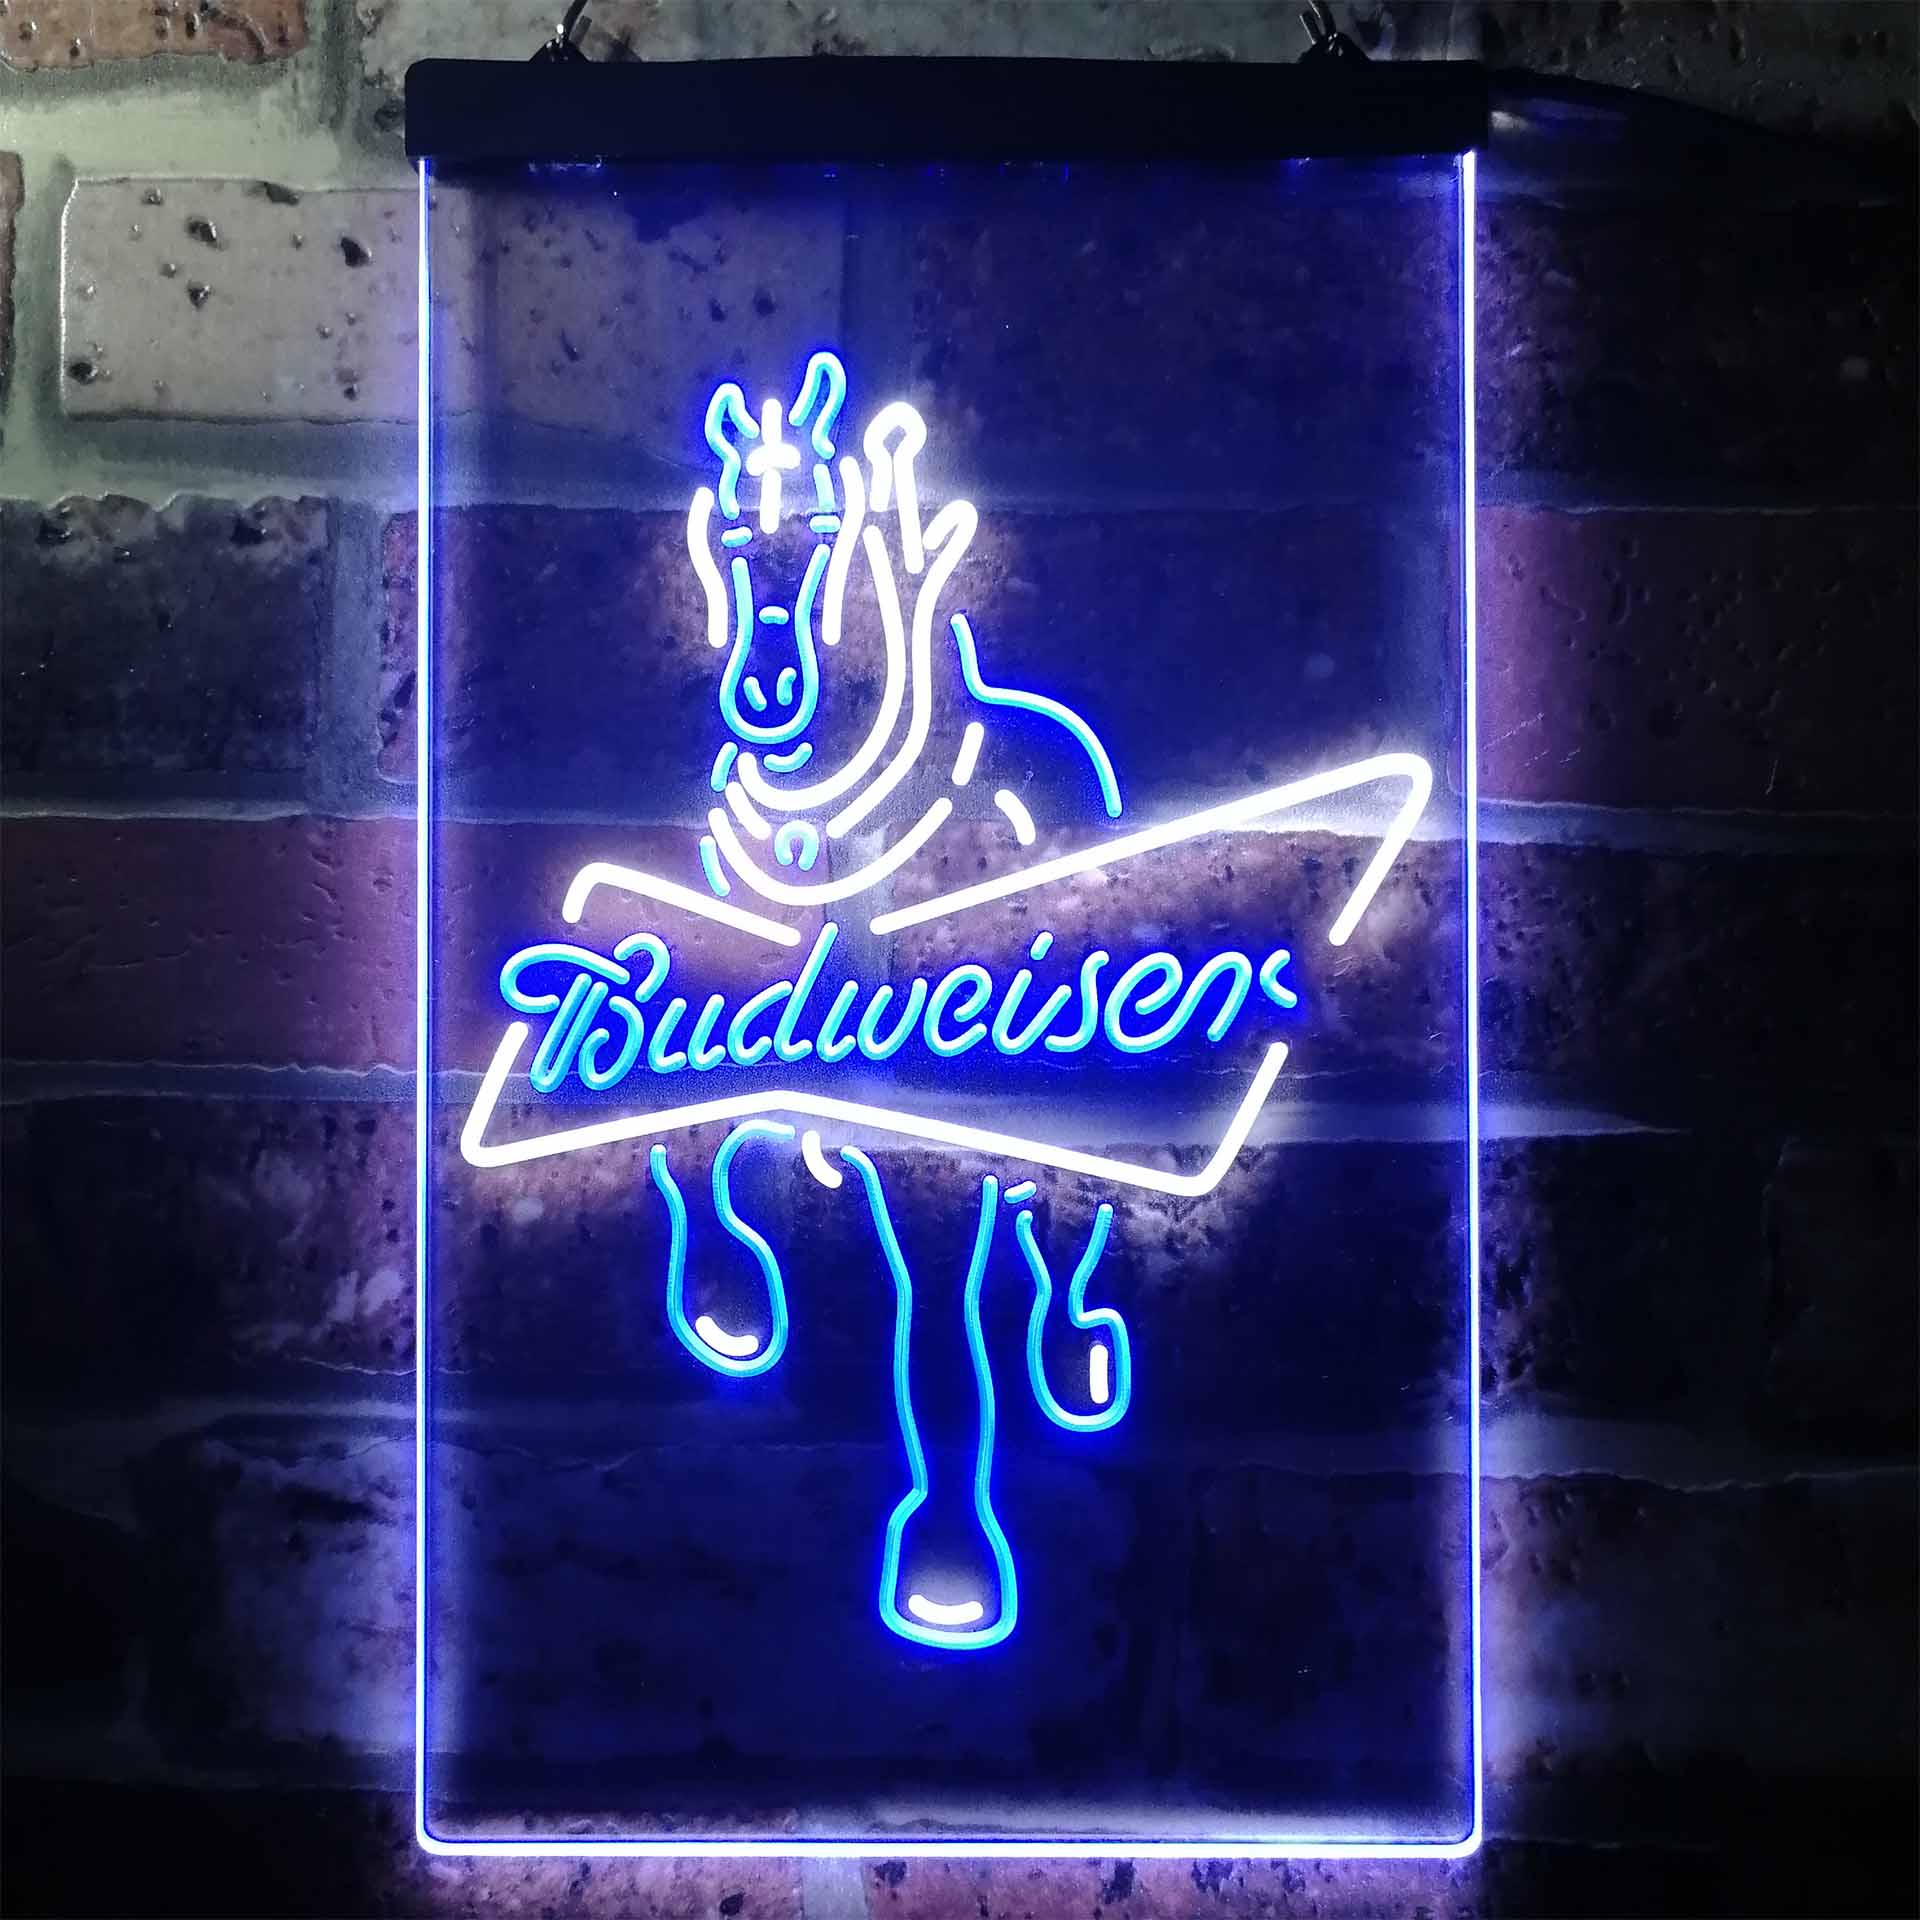 Budweiser Clydesdale Horse Neon LED Sign